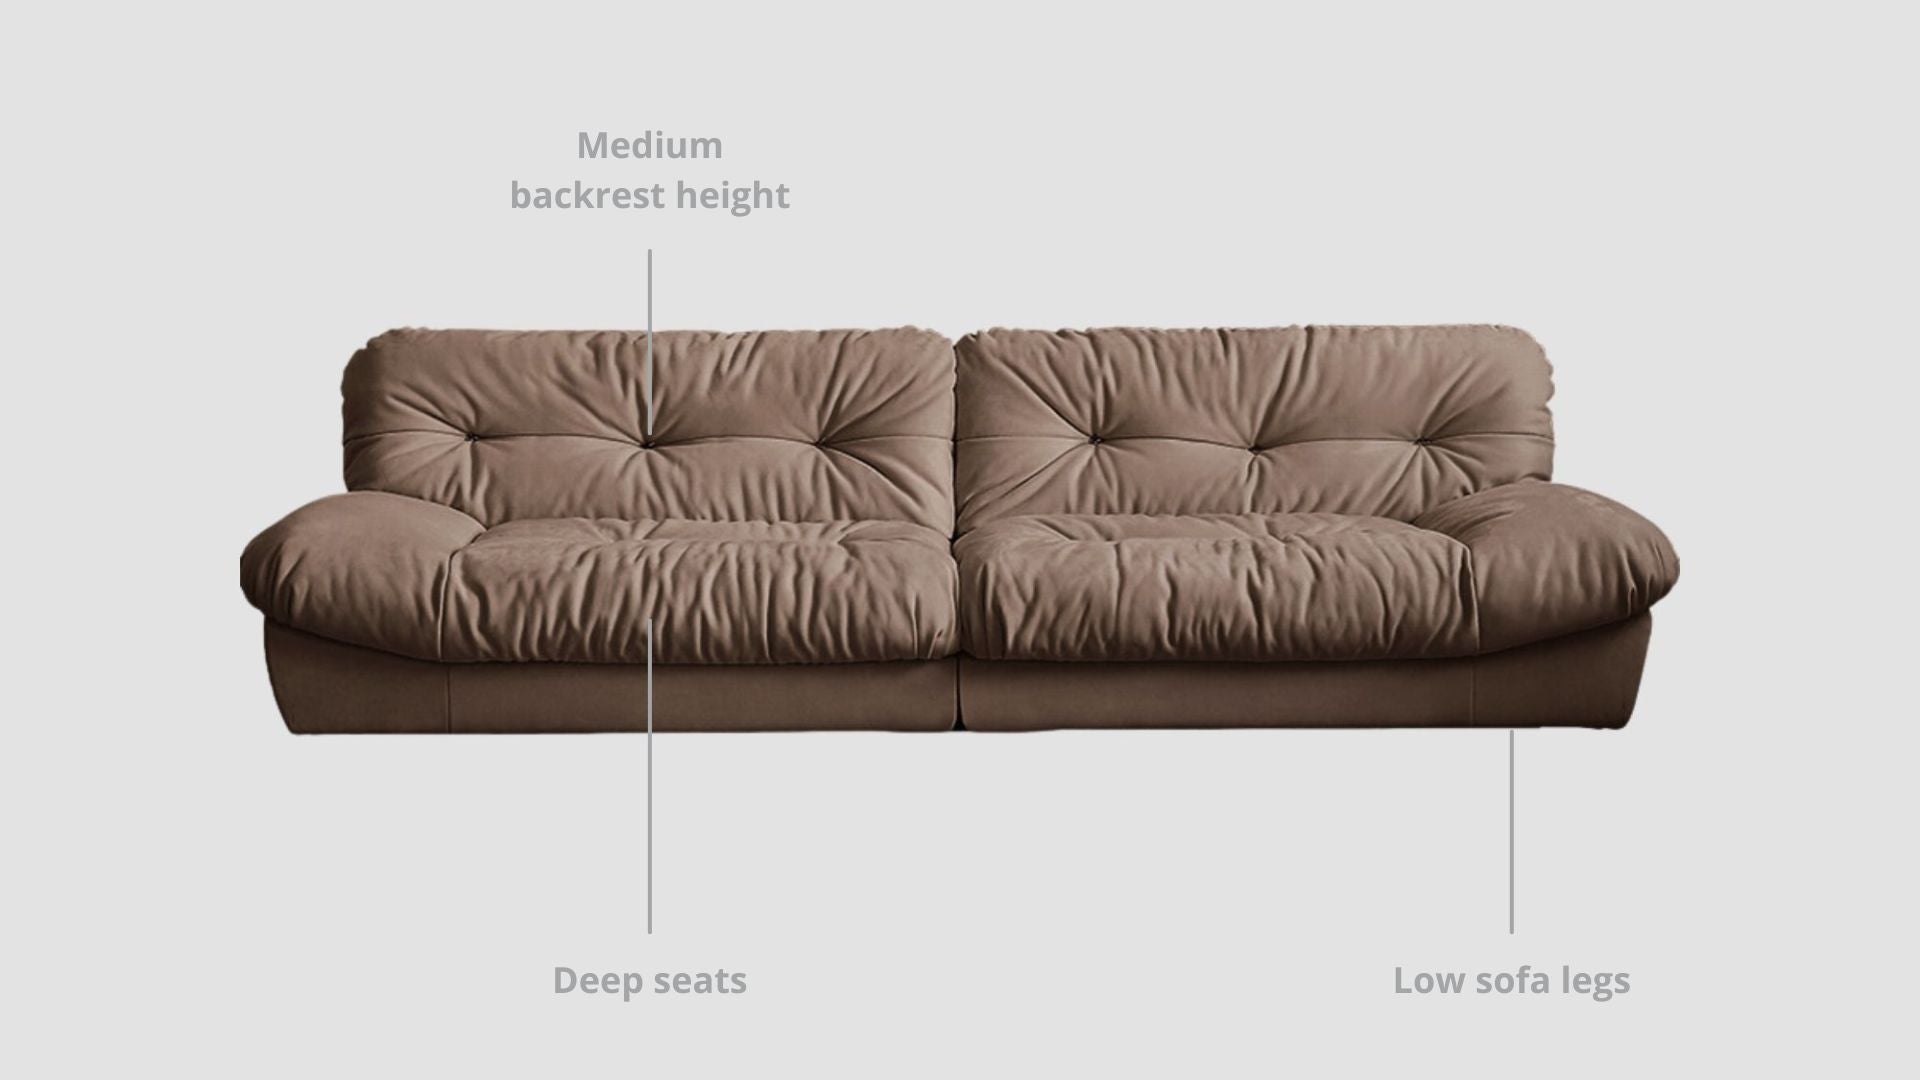 Key features such as armrest thickness, cushion height, seat depth and sofa leg height for Clora Fabric Sofa